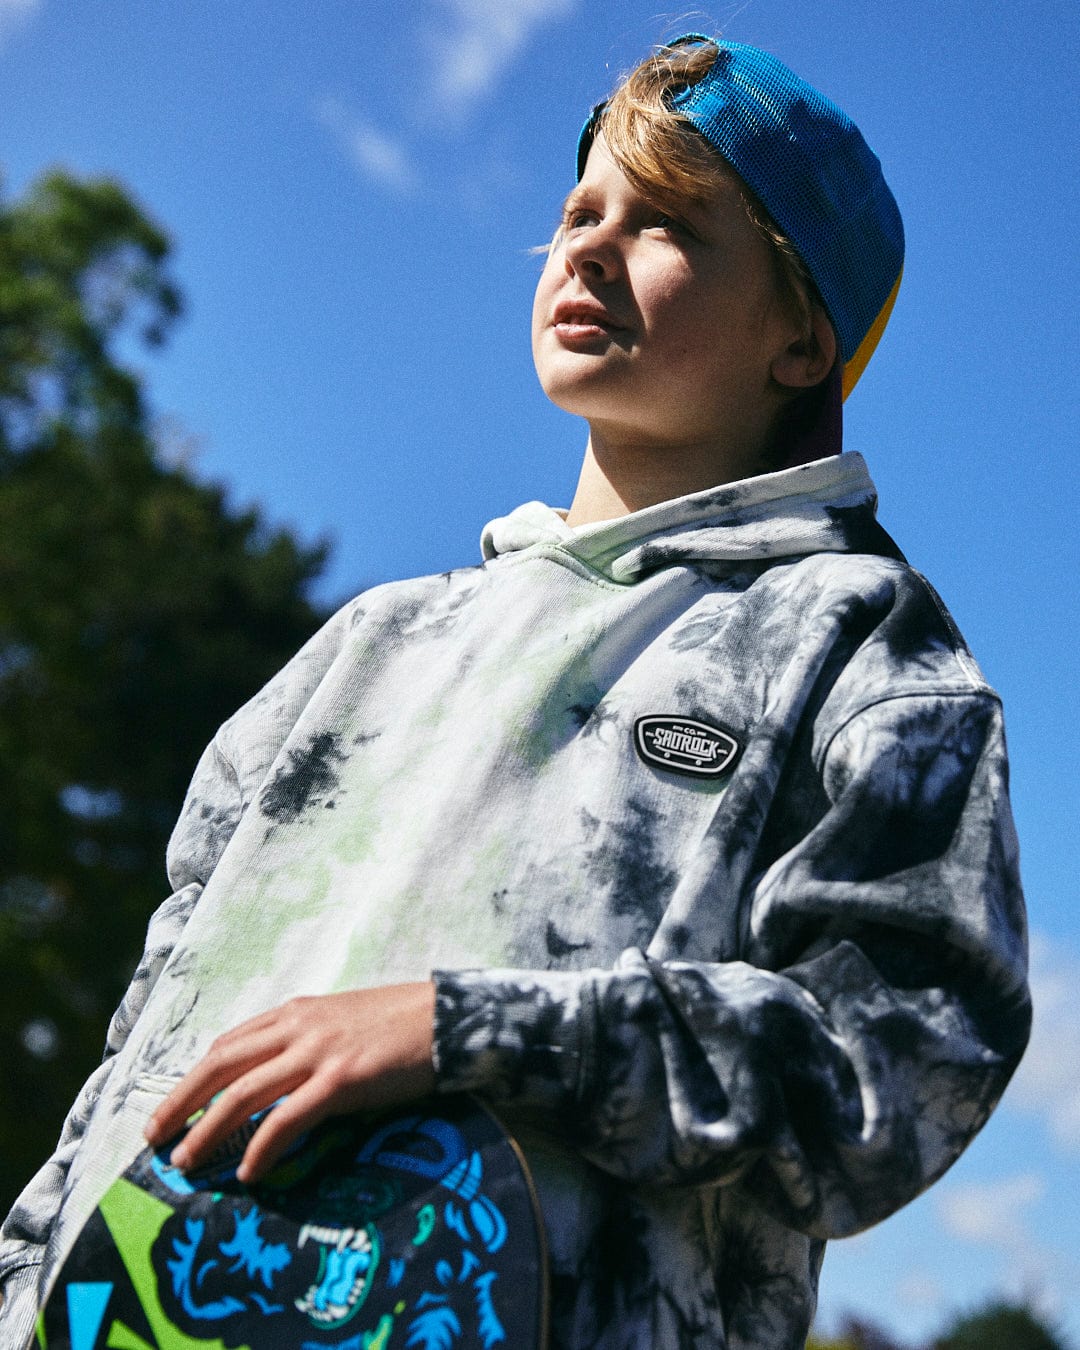 A person wearing a tie dye Saltrock Las Vegas Smackdown - Kids Glow in the Dark Oversized Pop Hoodie - Multi and a backward cap holds a skateboard. They are looking off into the distance with trees and a blue sky in the background.